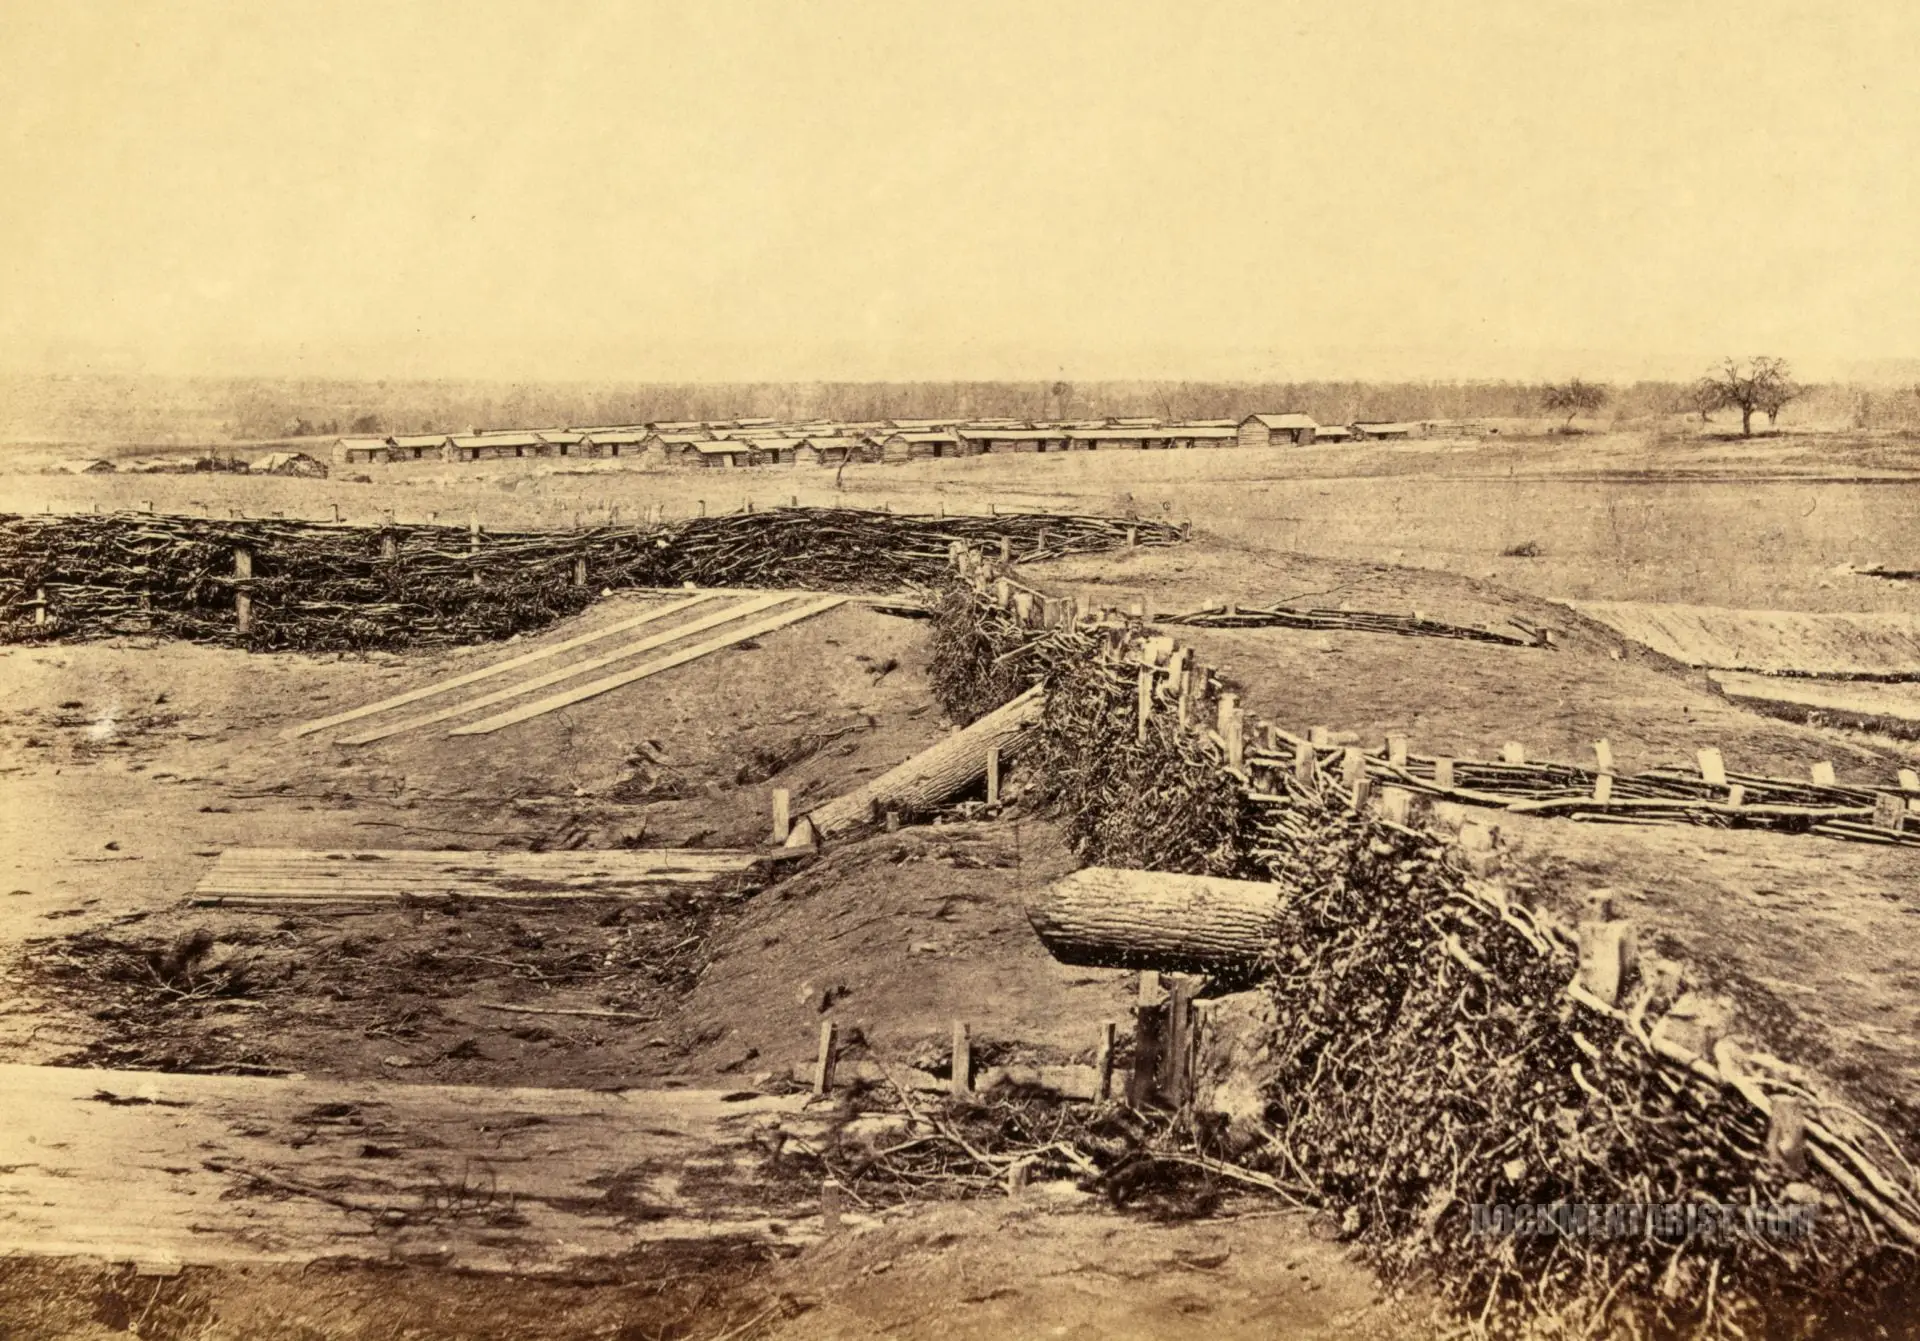 Confederate fortifications at Centreville, Va. March 1862. Quaker guns in foreground. Winter barracks in background.